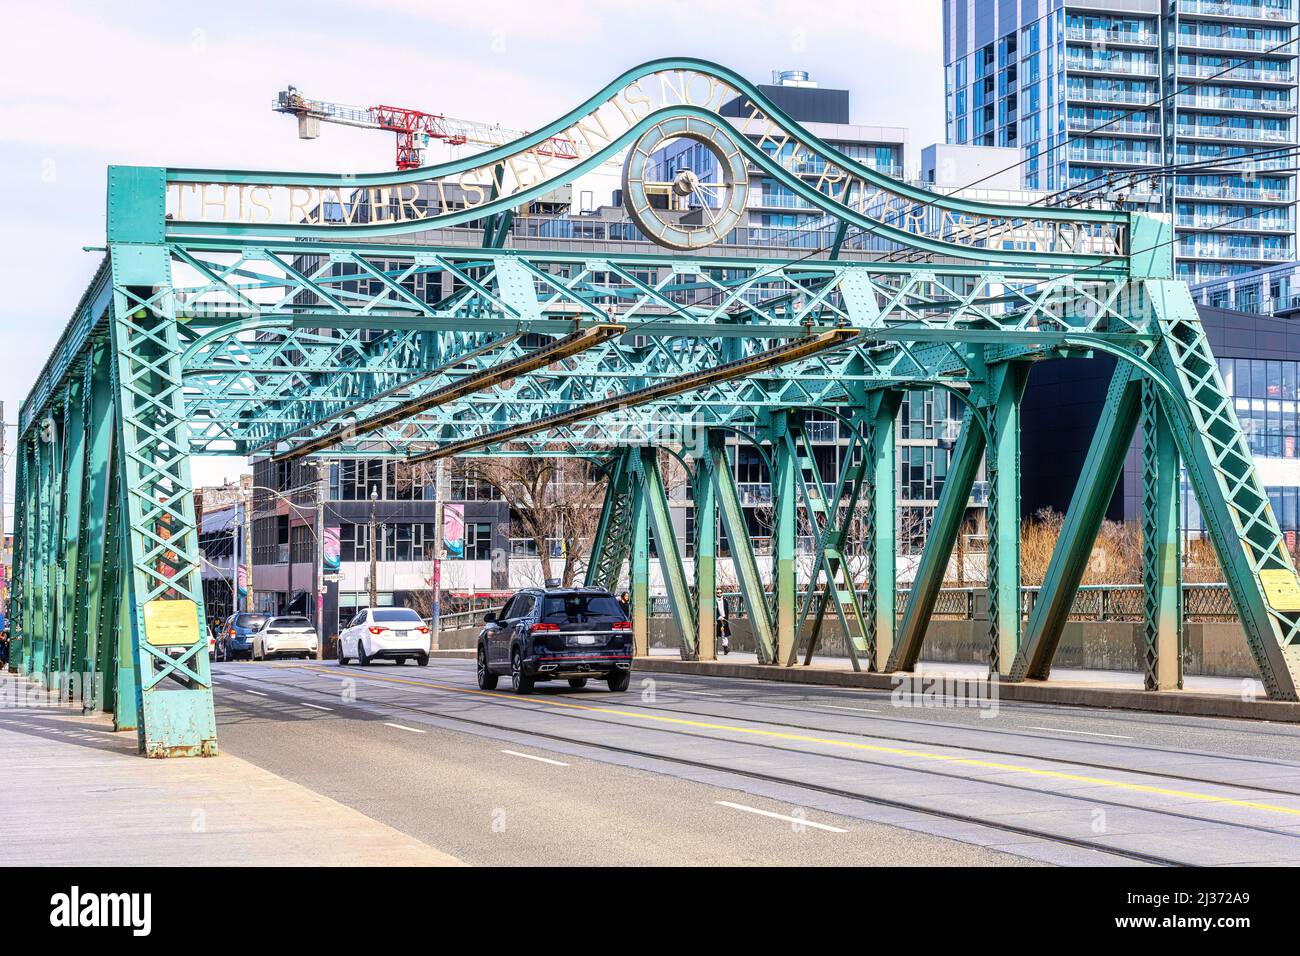 Metallic Pratt truss bridge known as the Queen St. Viaduct (1911). The old structure is an iconic view in the city which is the capital city of the On Stock Photo